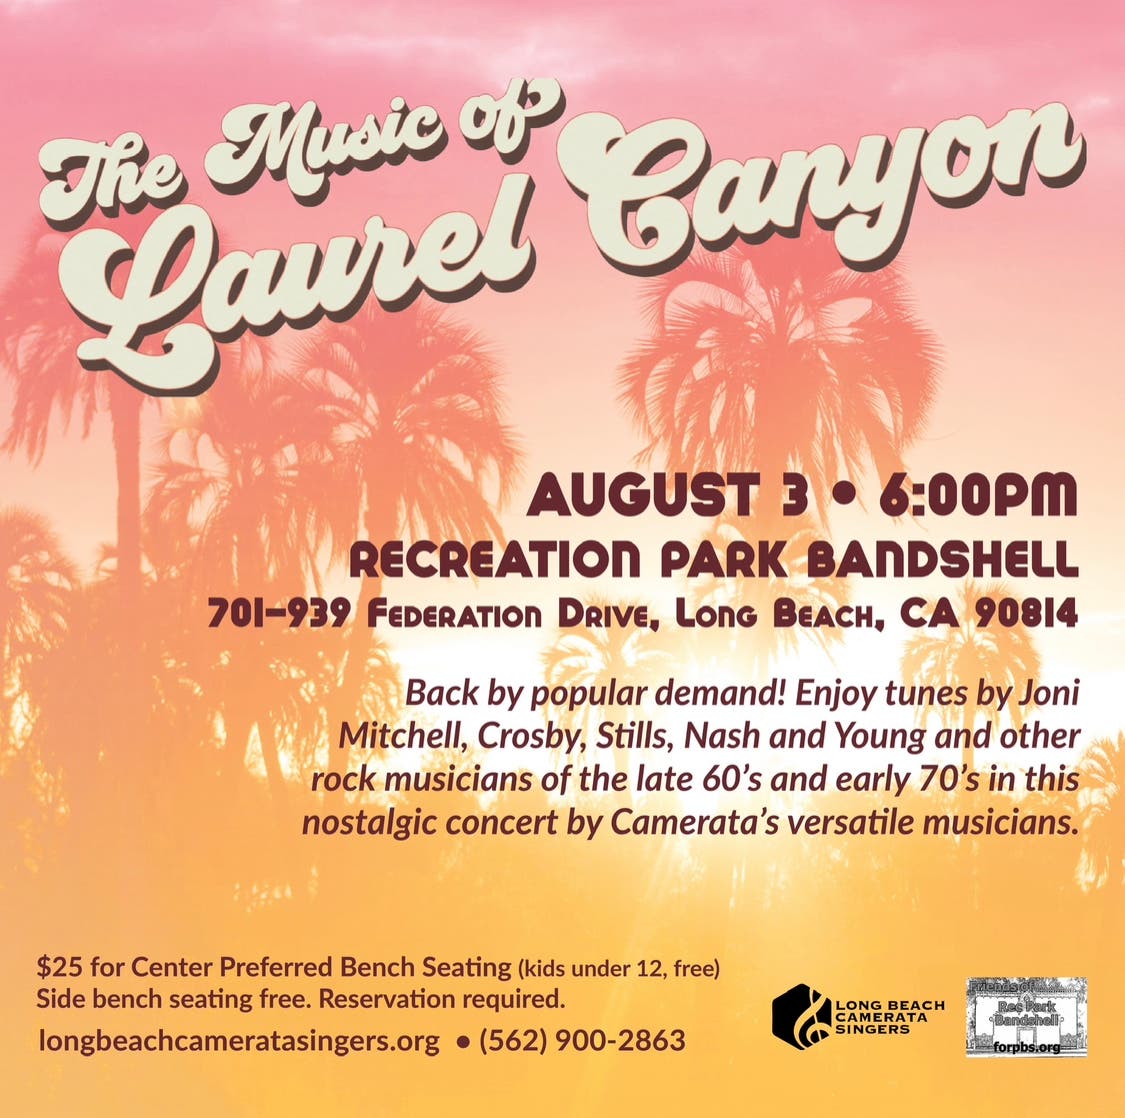 The Music of Laurel Canyon Presented by The Long Beach Camerata Singers